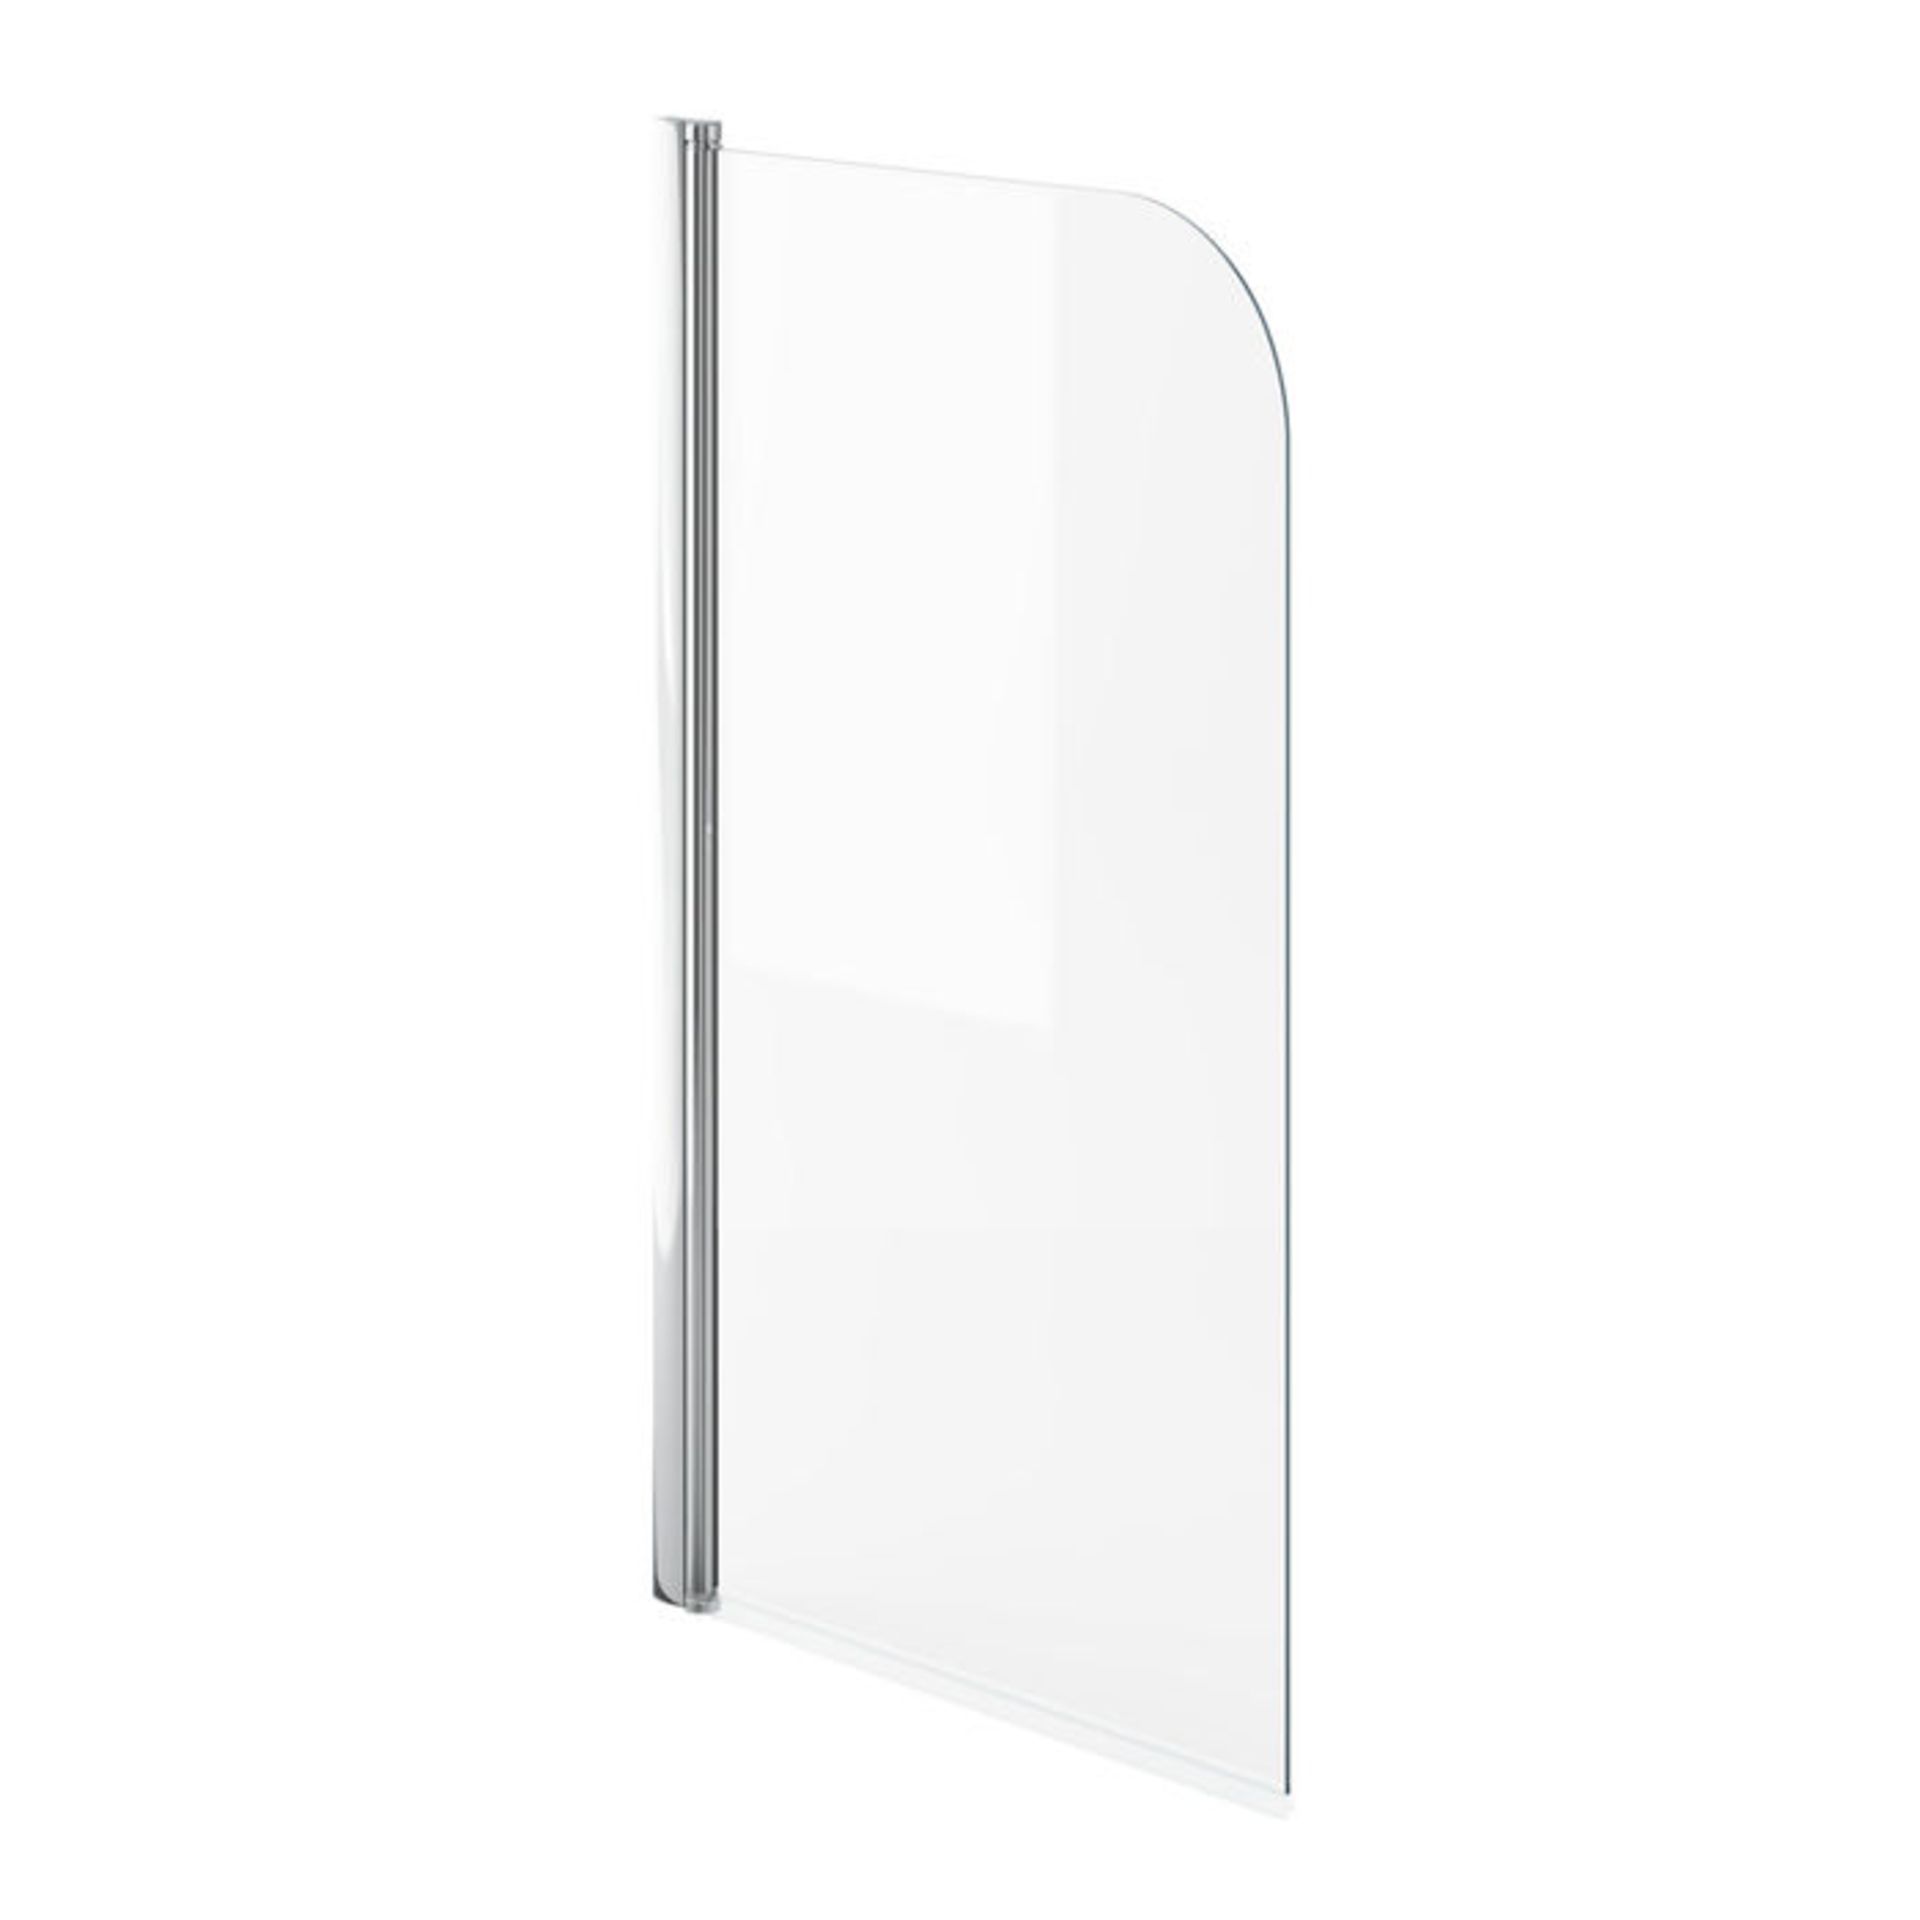 Twyfords 850mm - 8mm - EasyClean Right Hand Straight Bath Screen. 6mm Tempered Saftey Glass Scr... - Image 3 of 3